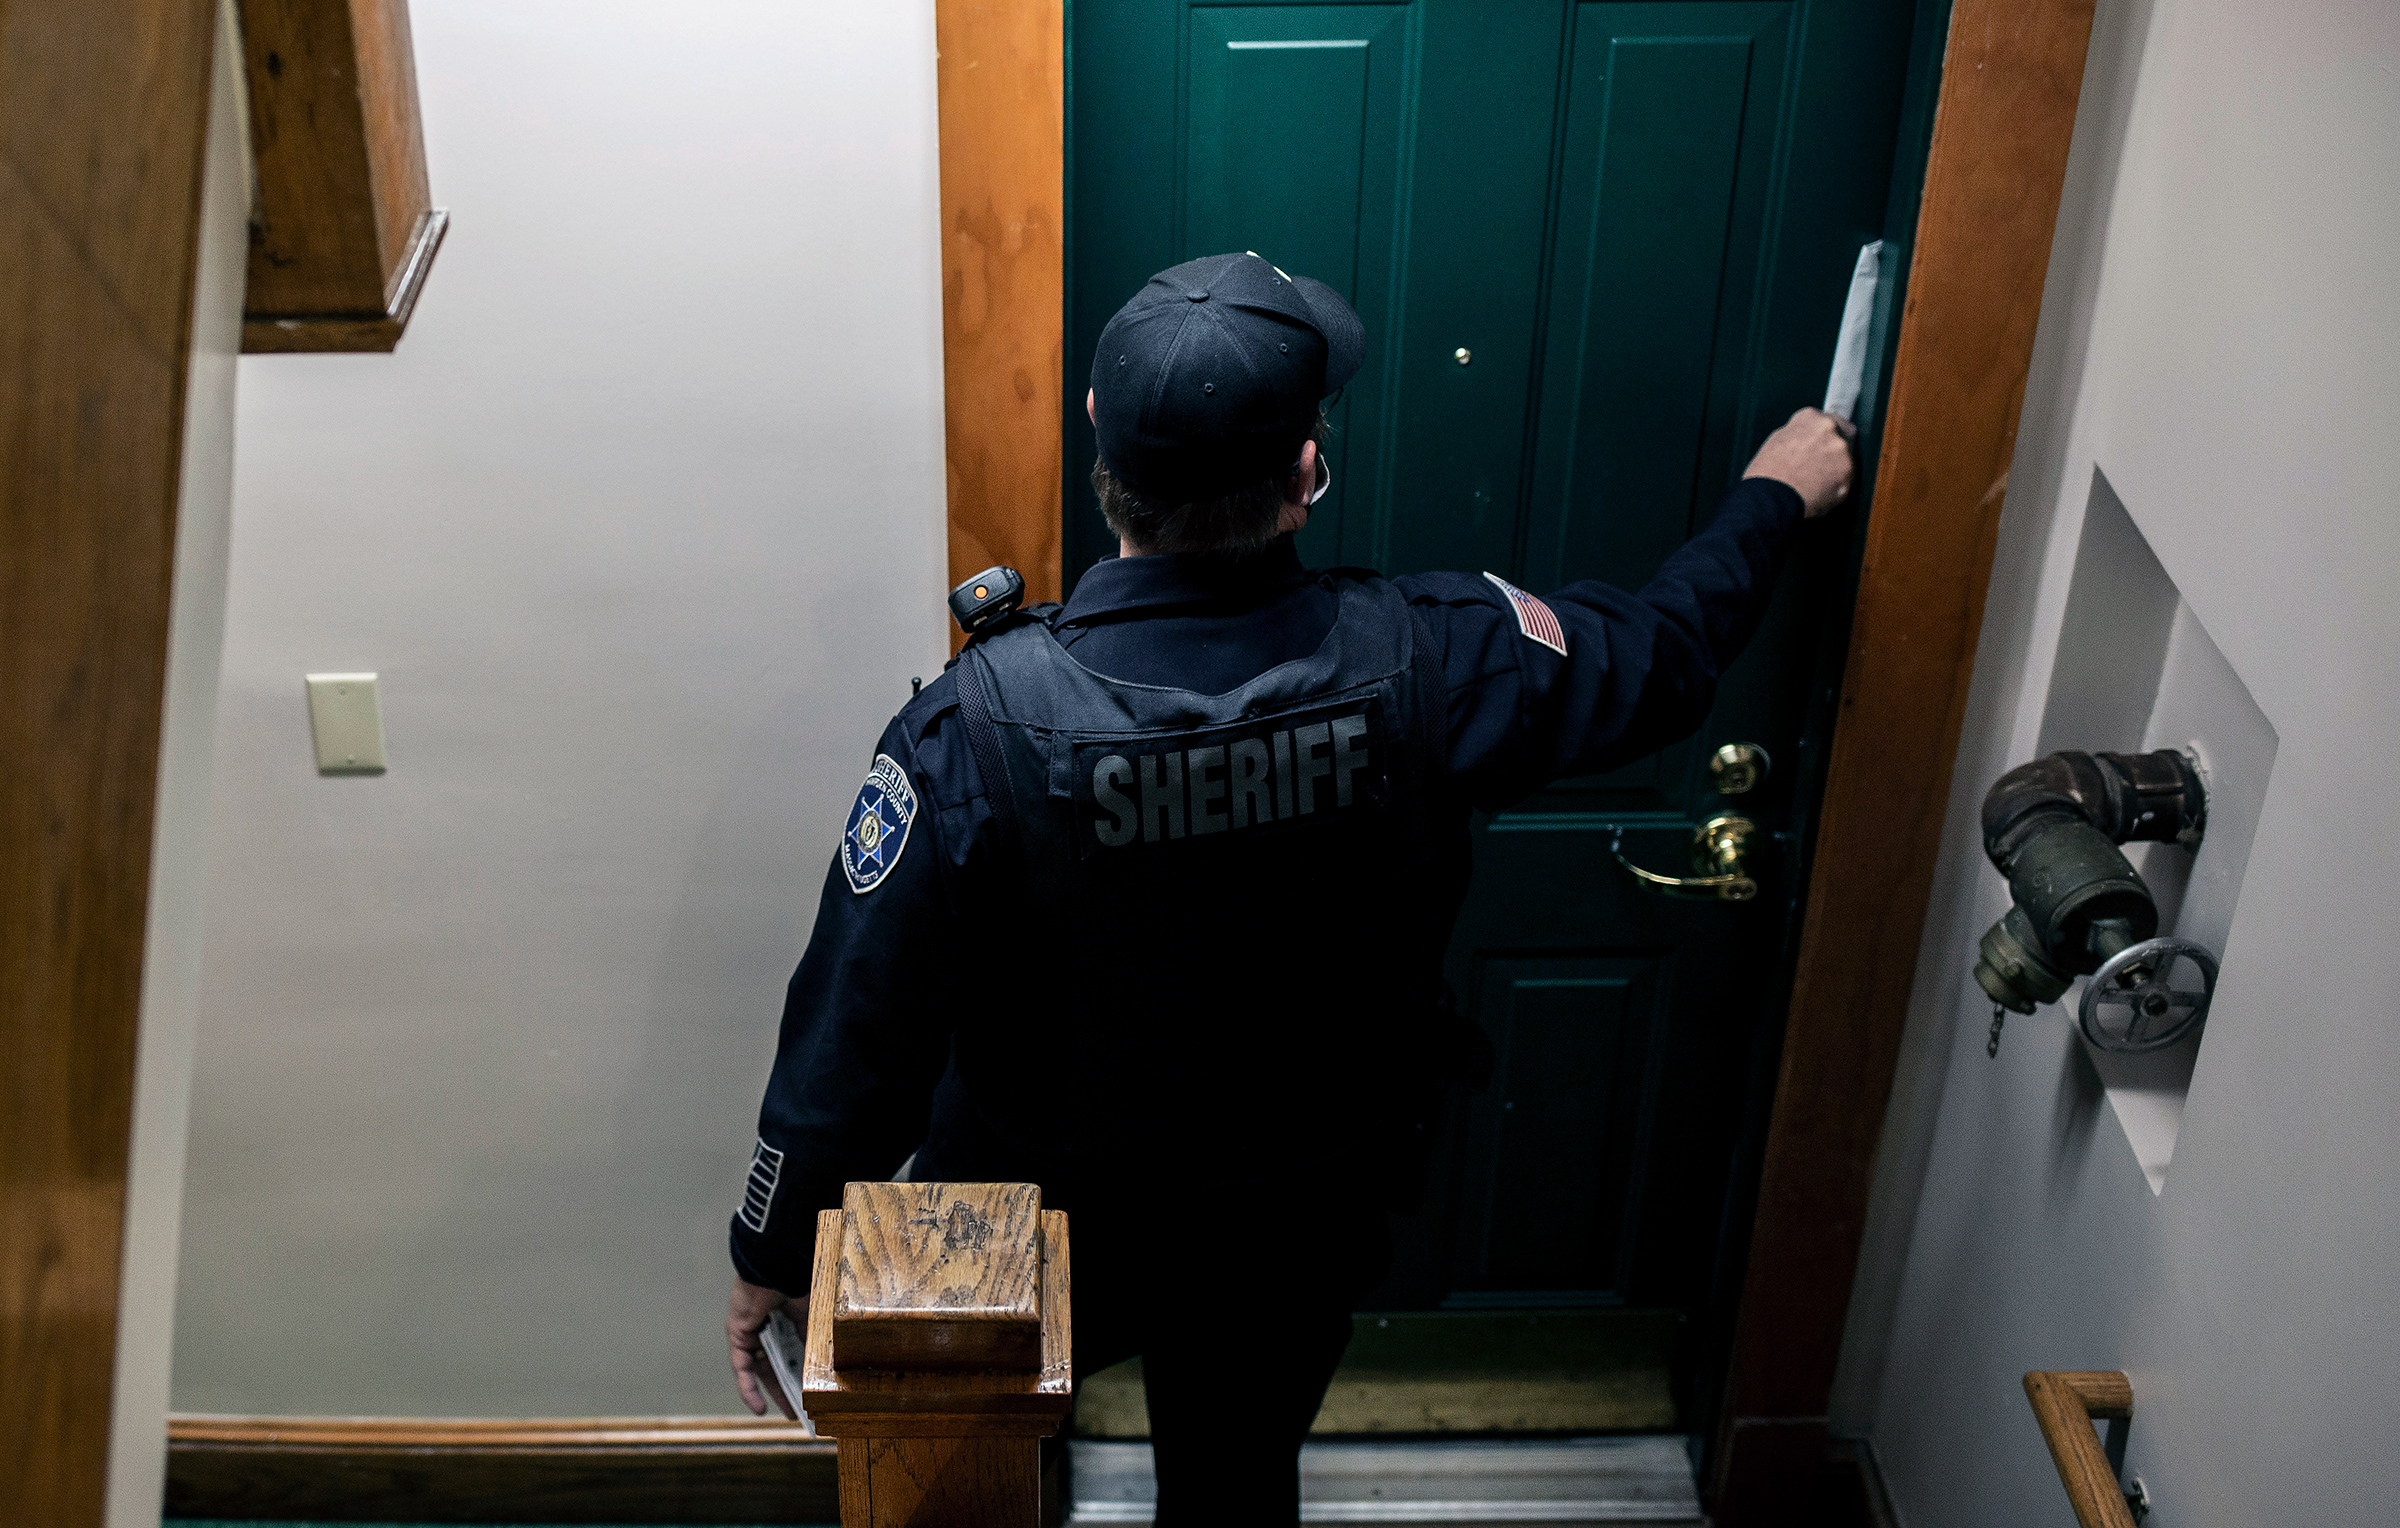 An eviction notice is placed in the doorway of an apartment in Springfield, Mass., on Dec. 16, 2020. (Bryan Anselm/The New York Times)